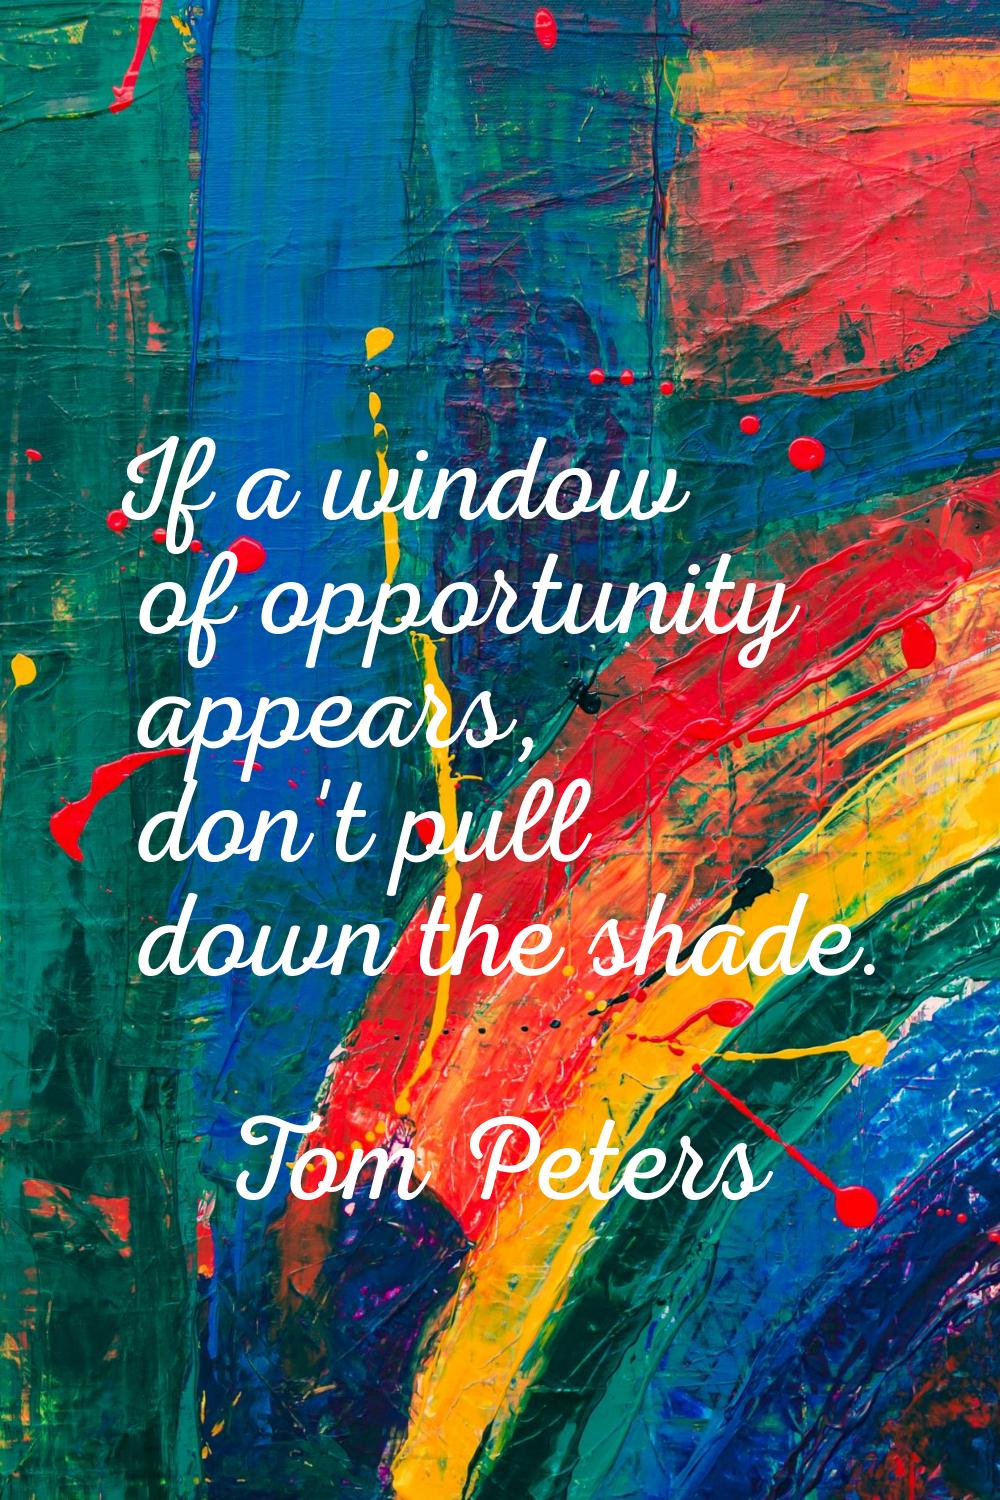 If a window of opportunity appears, don't pull down the shade.